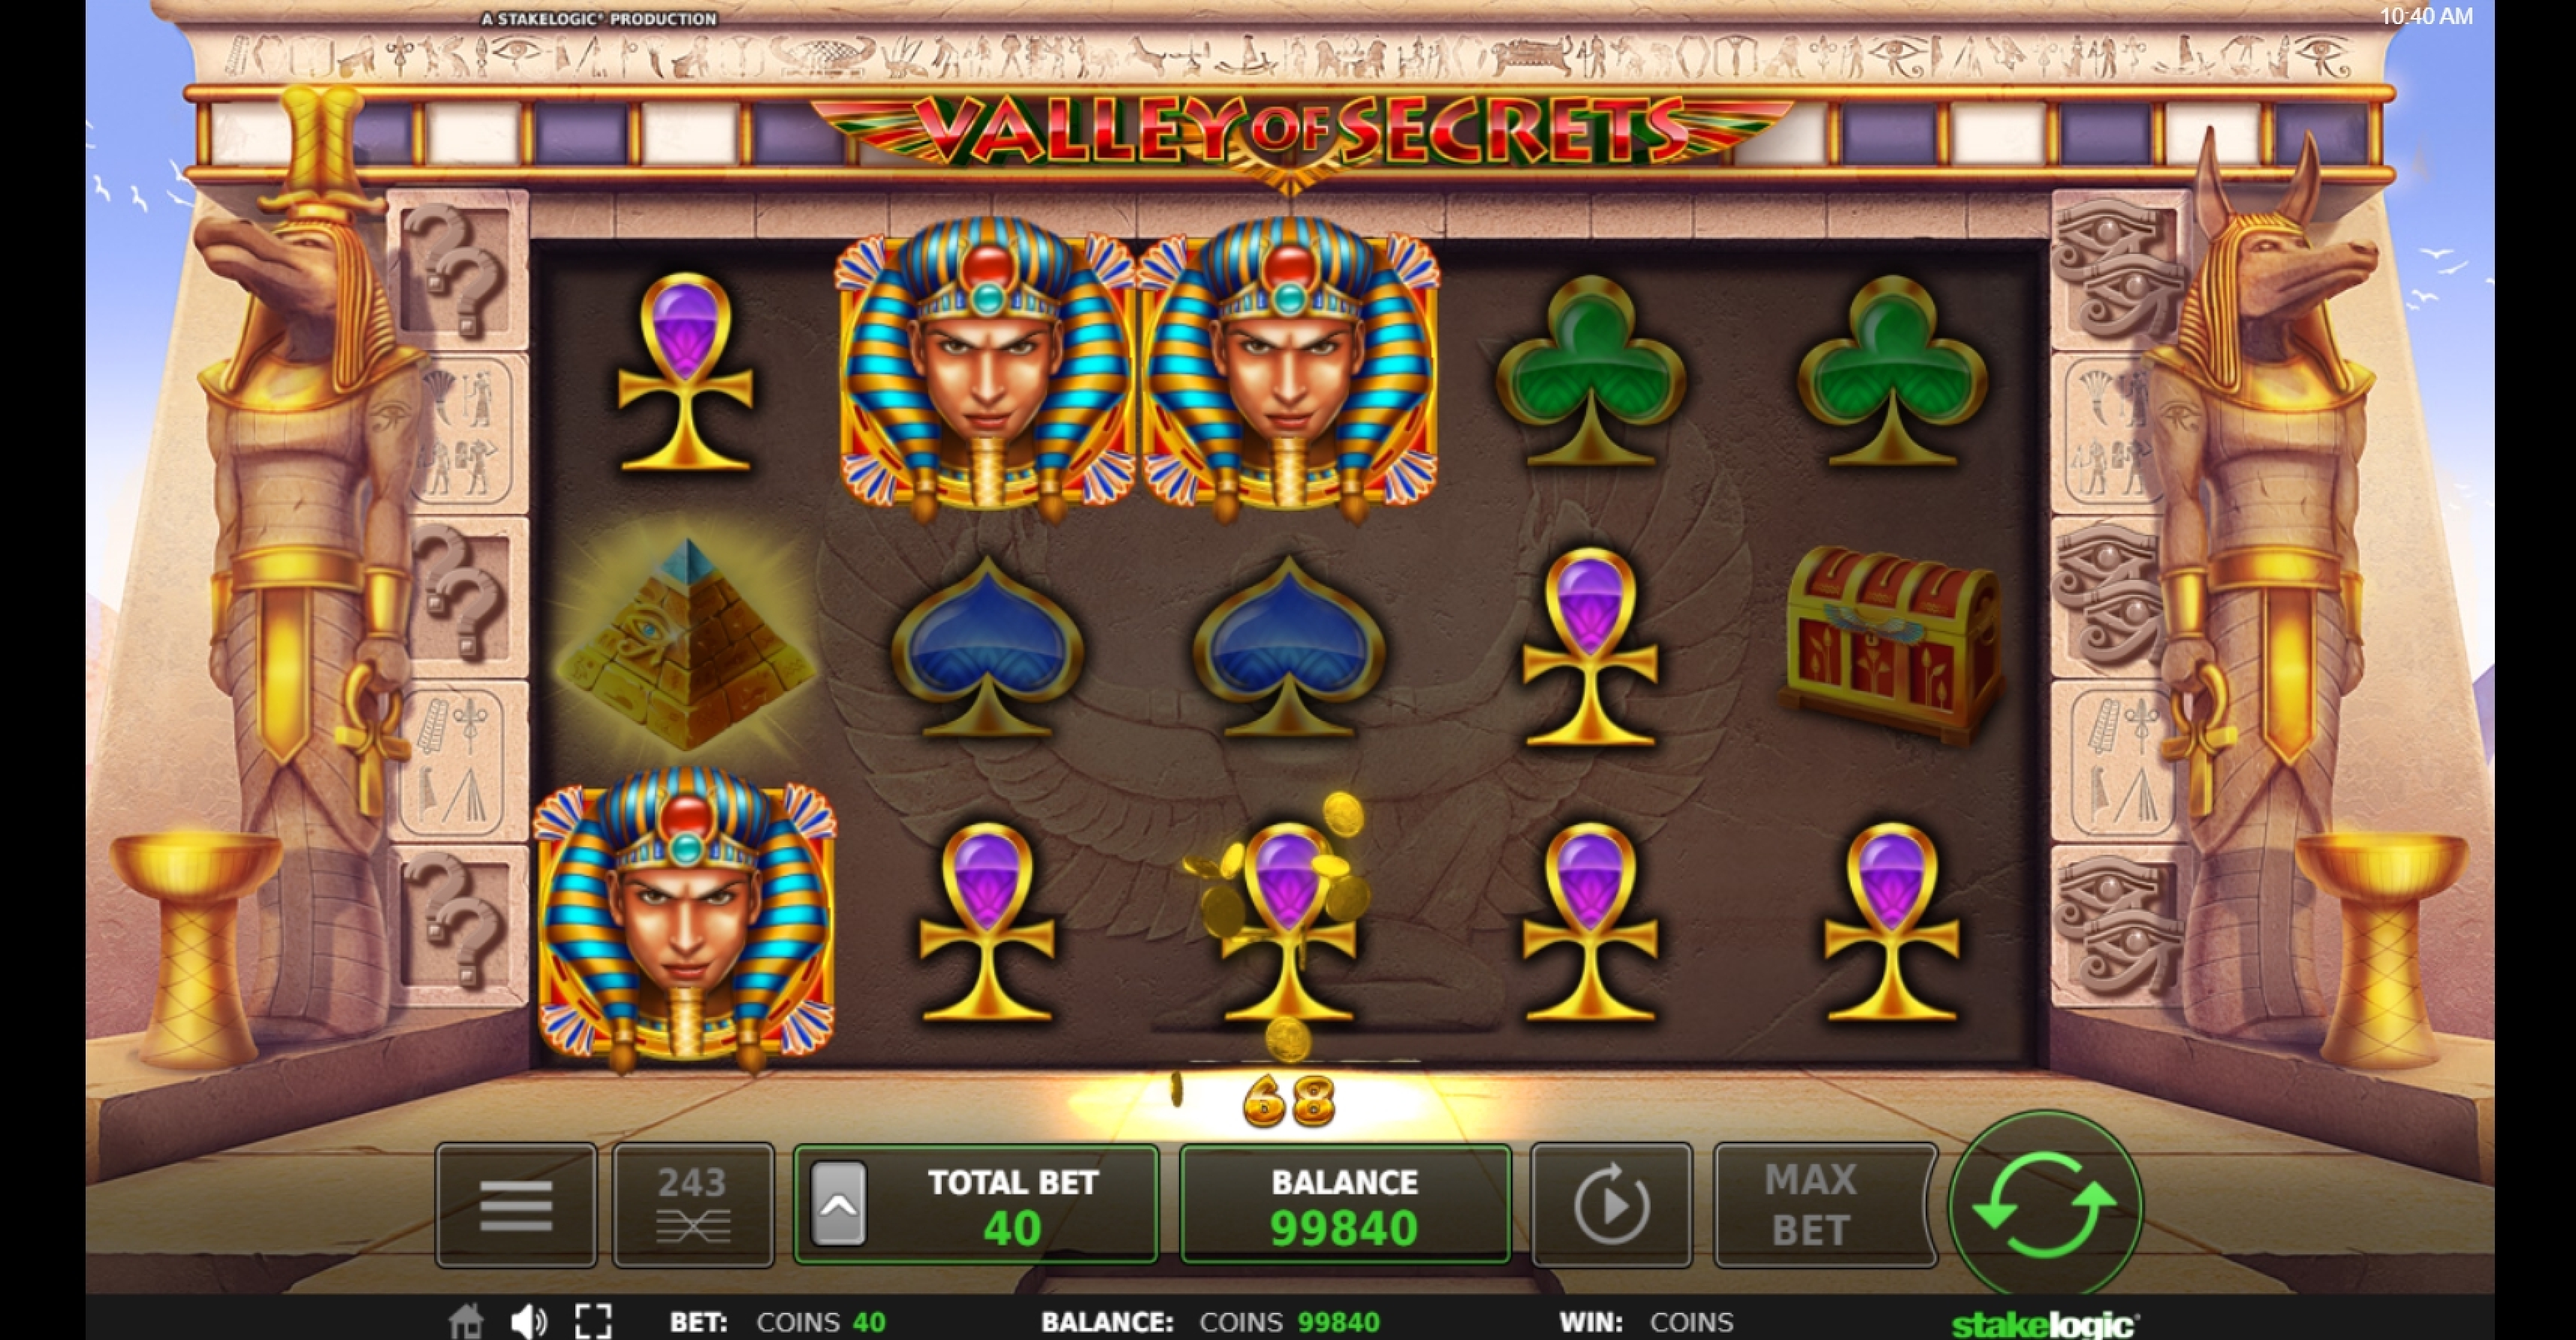 Win Money in Valley of Secrets Free Slot Game by Stakelogic